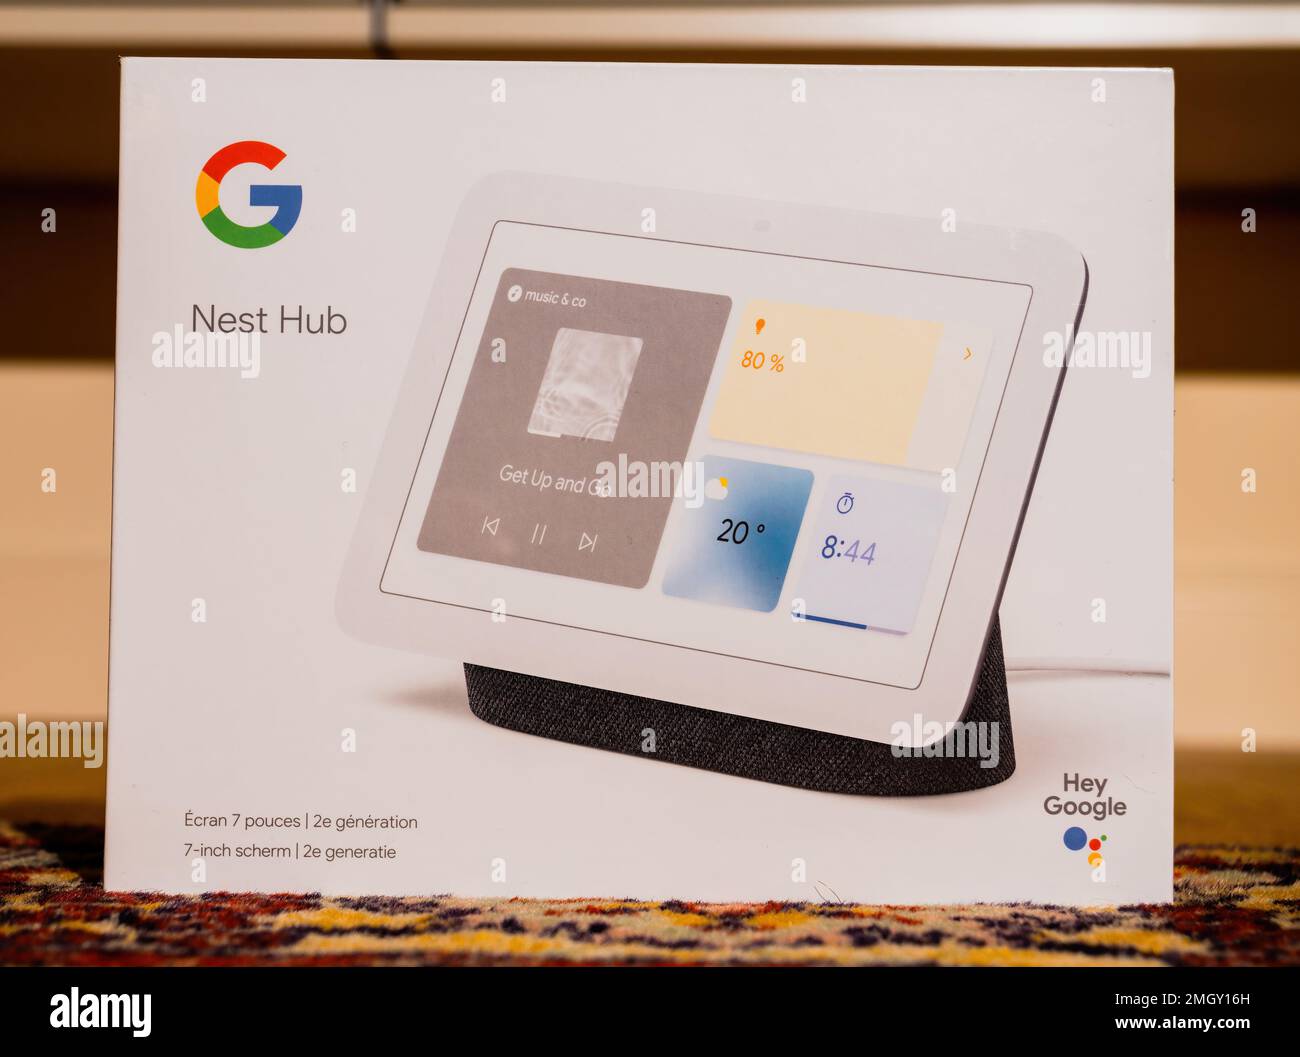 Paris, France - Dec 2, 2022: Close-up of new Google Nest Hub with Hey google service - personal assistant smart speaker - use voice commands with limited touch surface - large display Stock Photo